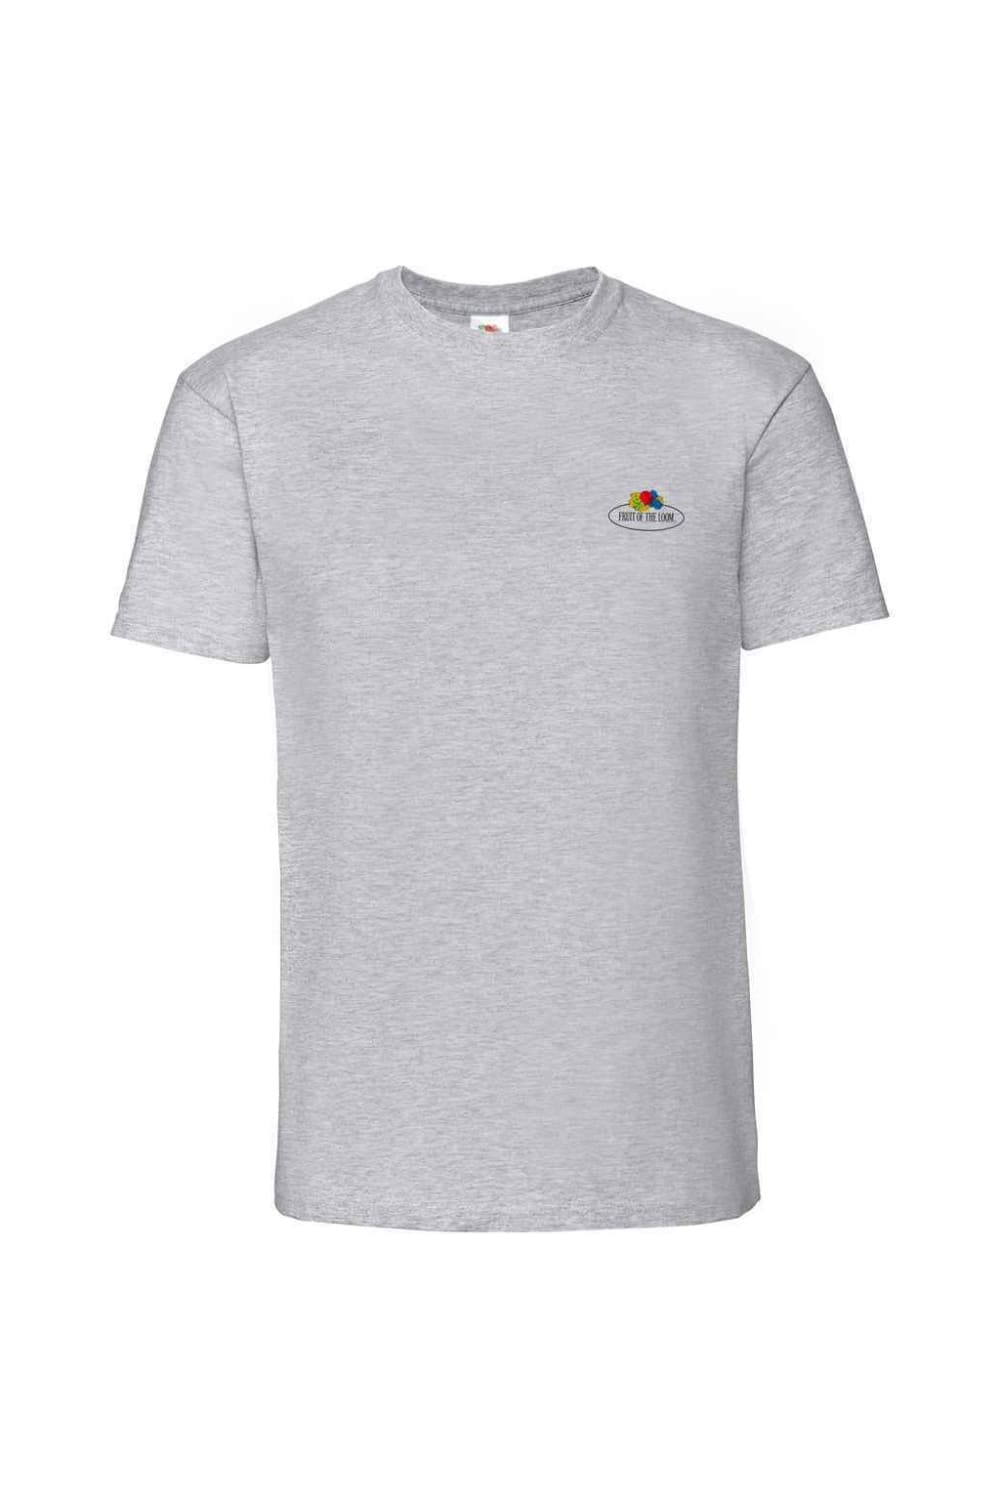 Fruit of the Loom Mens Vintage Small Logo T-Shirt (Gray Heather)